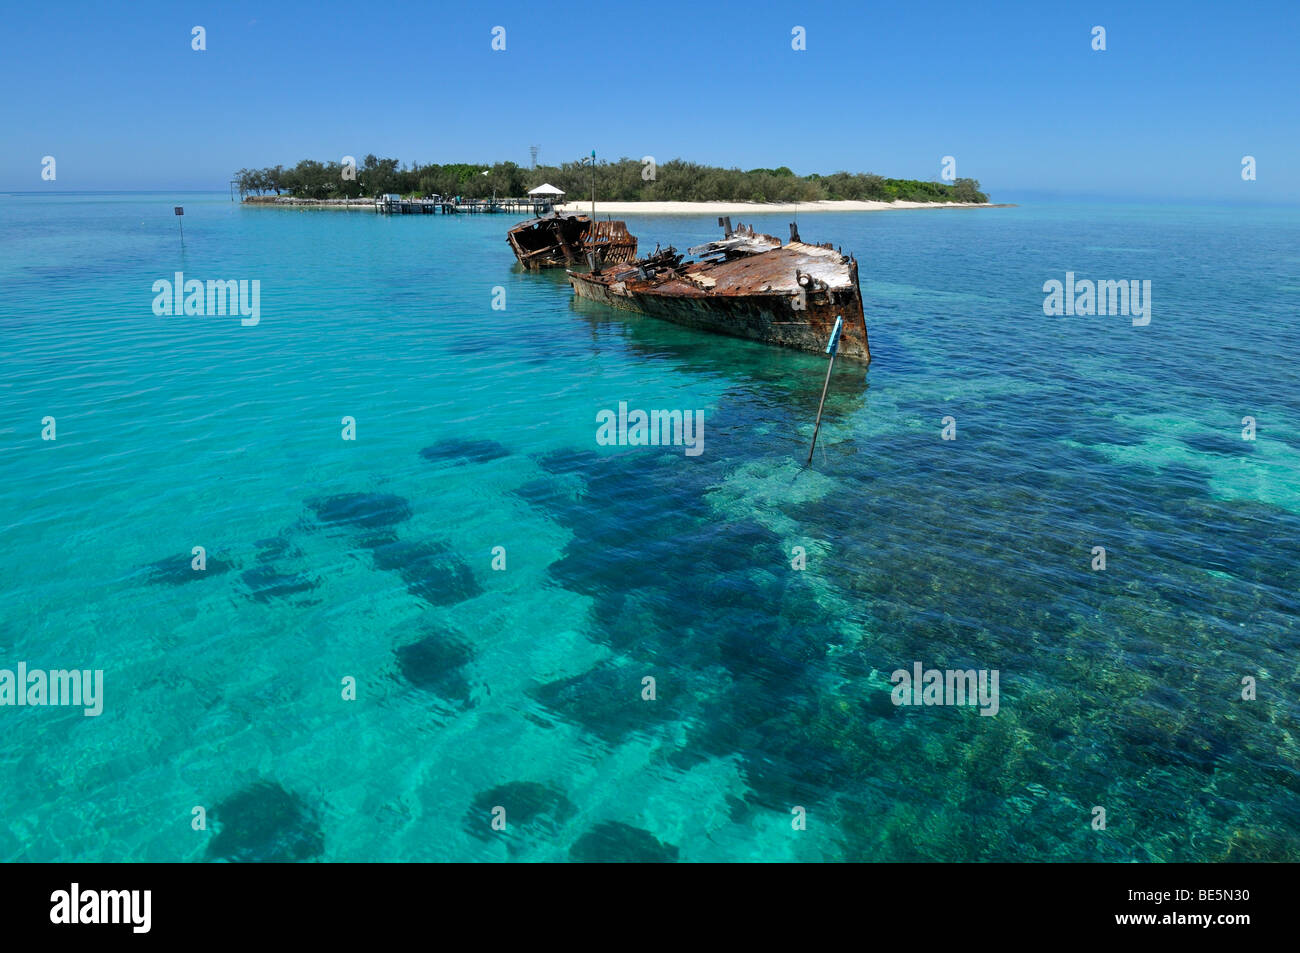 Shipwreck in front of Heron Island, Capricornia Cays National Park, Great Barrier Reef, Queensland, Australia Stock Photo